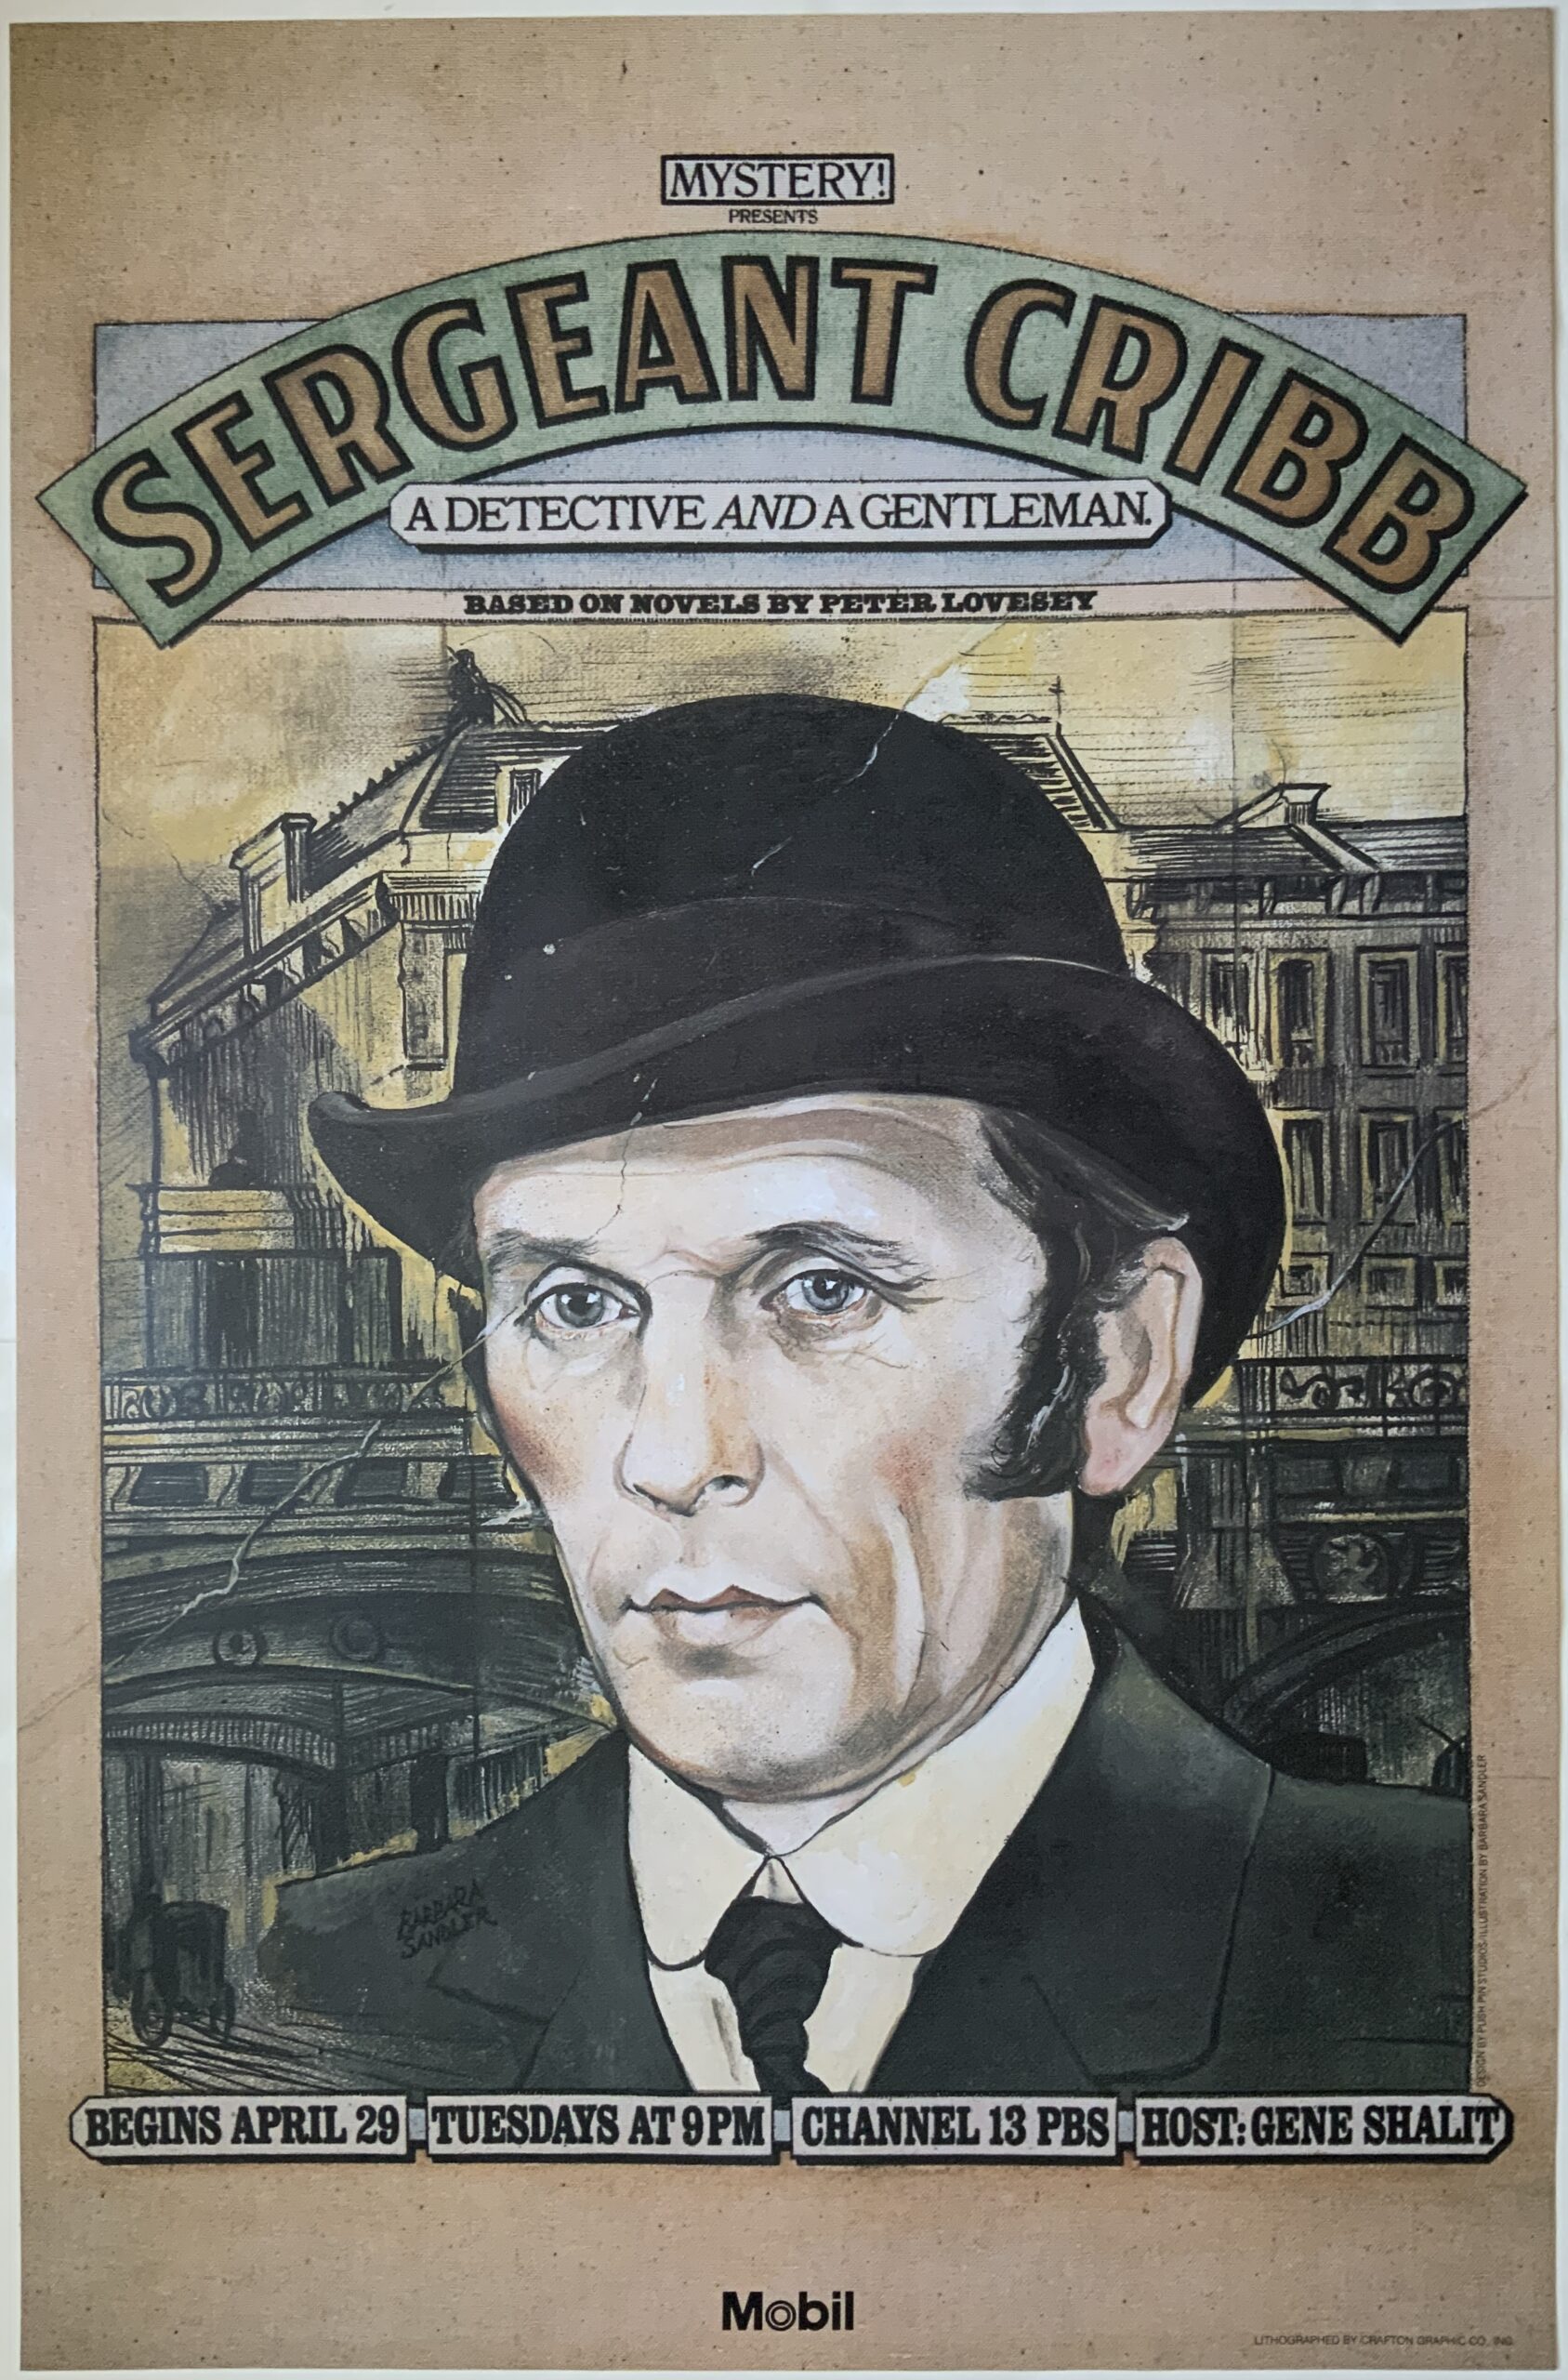 M635	SERGEANT CRIBB MOBILE - “A DETECTIVE AND A GENTLEMAN” POSTER